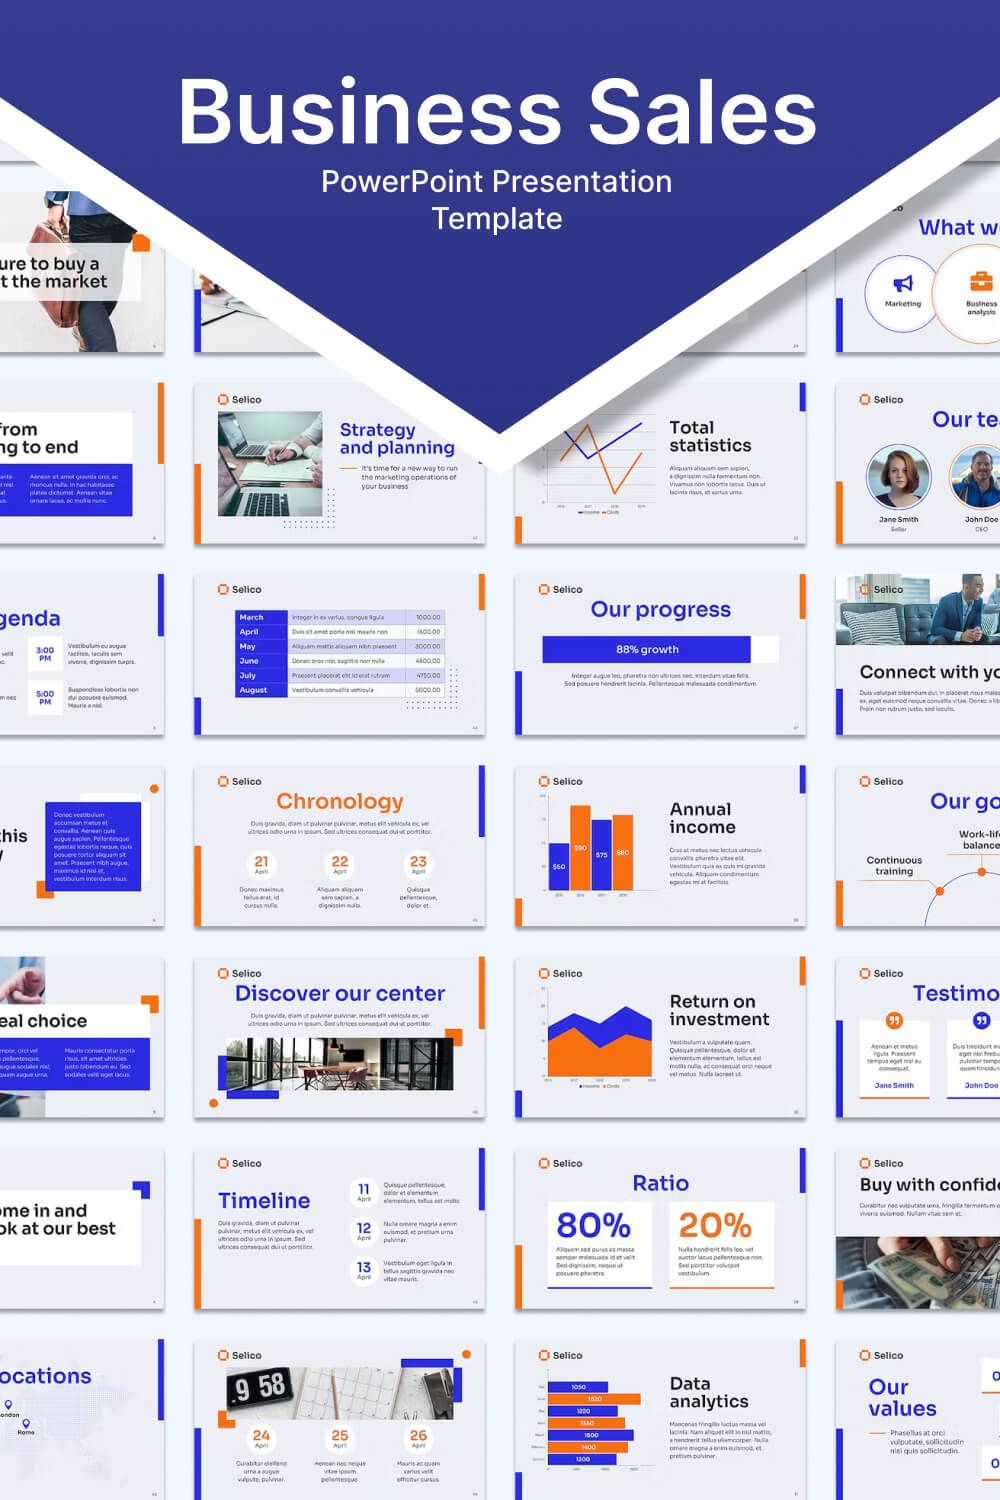 Chronology of Business Sales PowerPoint Presentation Template.